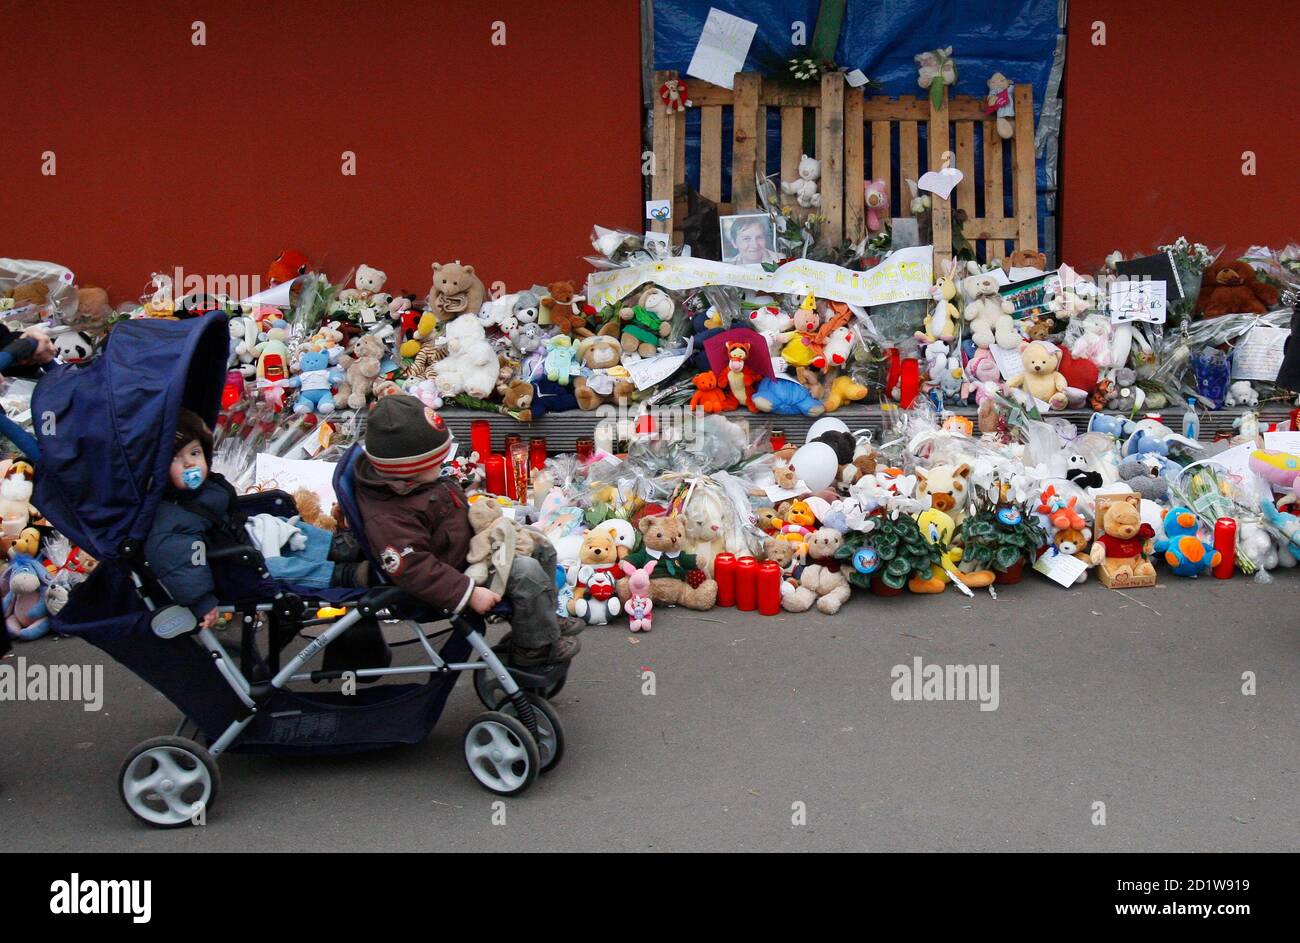 Children pass by flowers placed at the entrance of a creche in Dendermonde January 26, 2009. The man charged with murdering two infants and a woman in a frenzied knife attack at a Belgian child care centre is suspected of killing a 73-year-old woman a week before, prosecutors said on Monday.   REUTERS/Francois Lenoir   (BELGIUM) Stock Photo